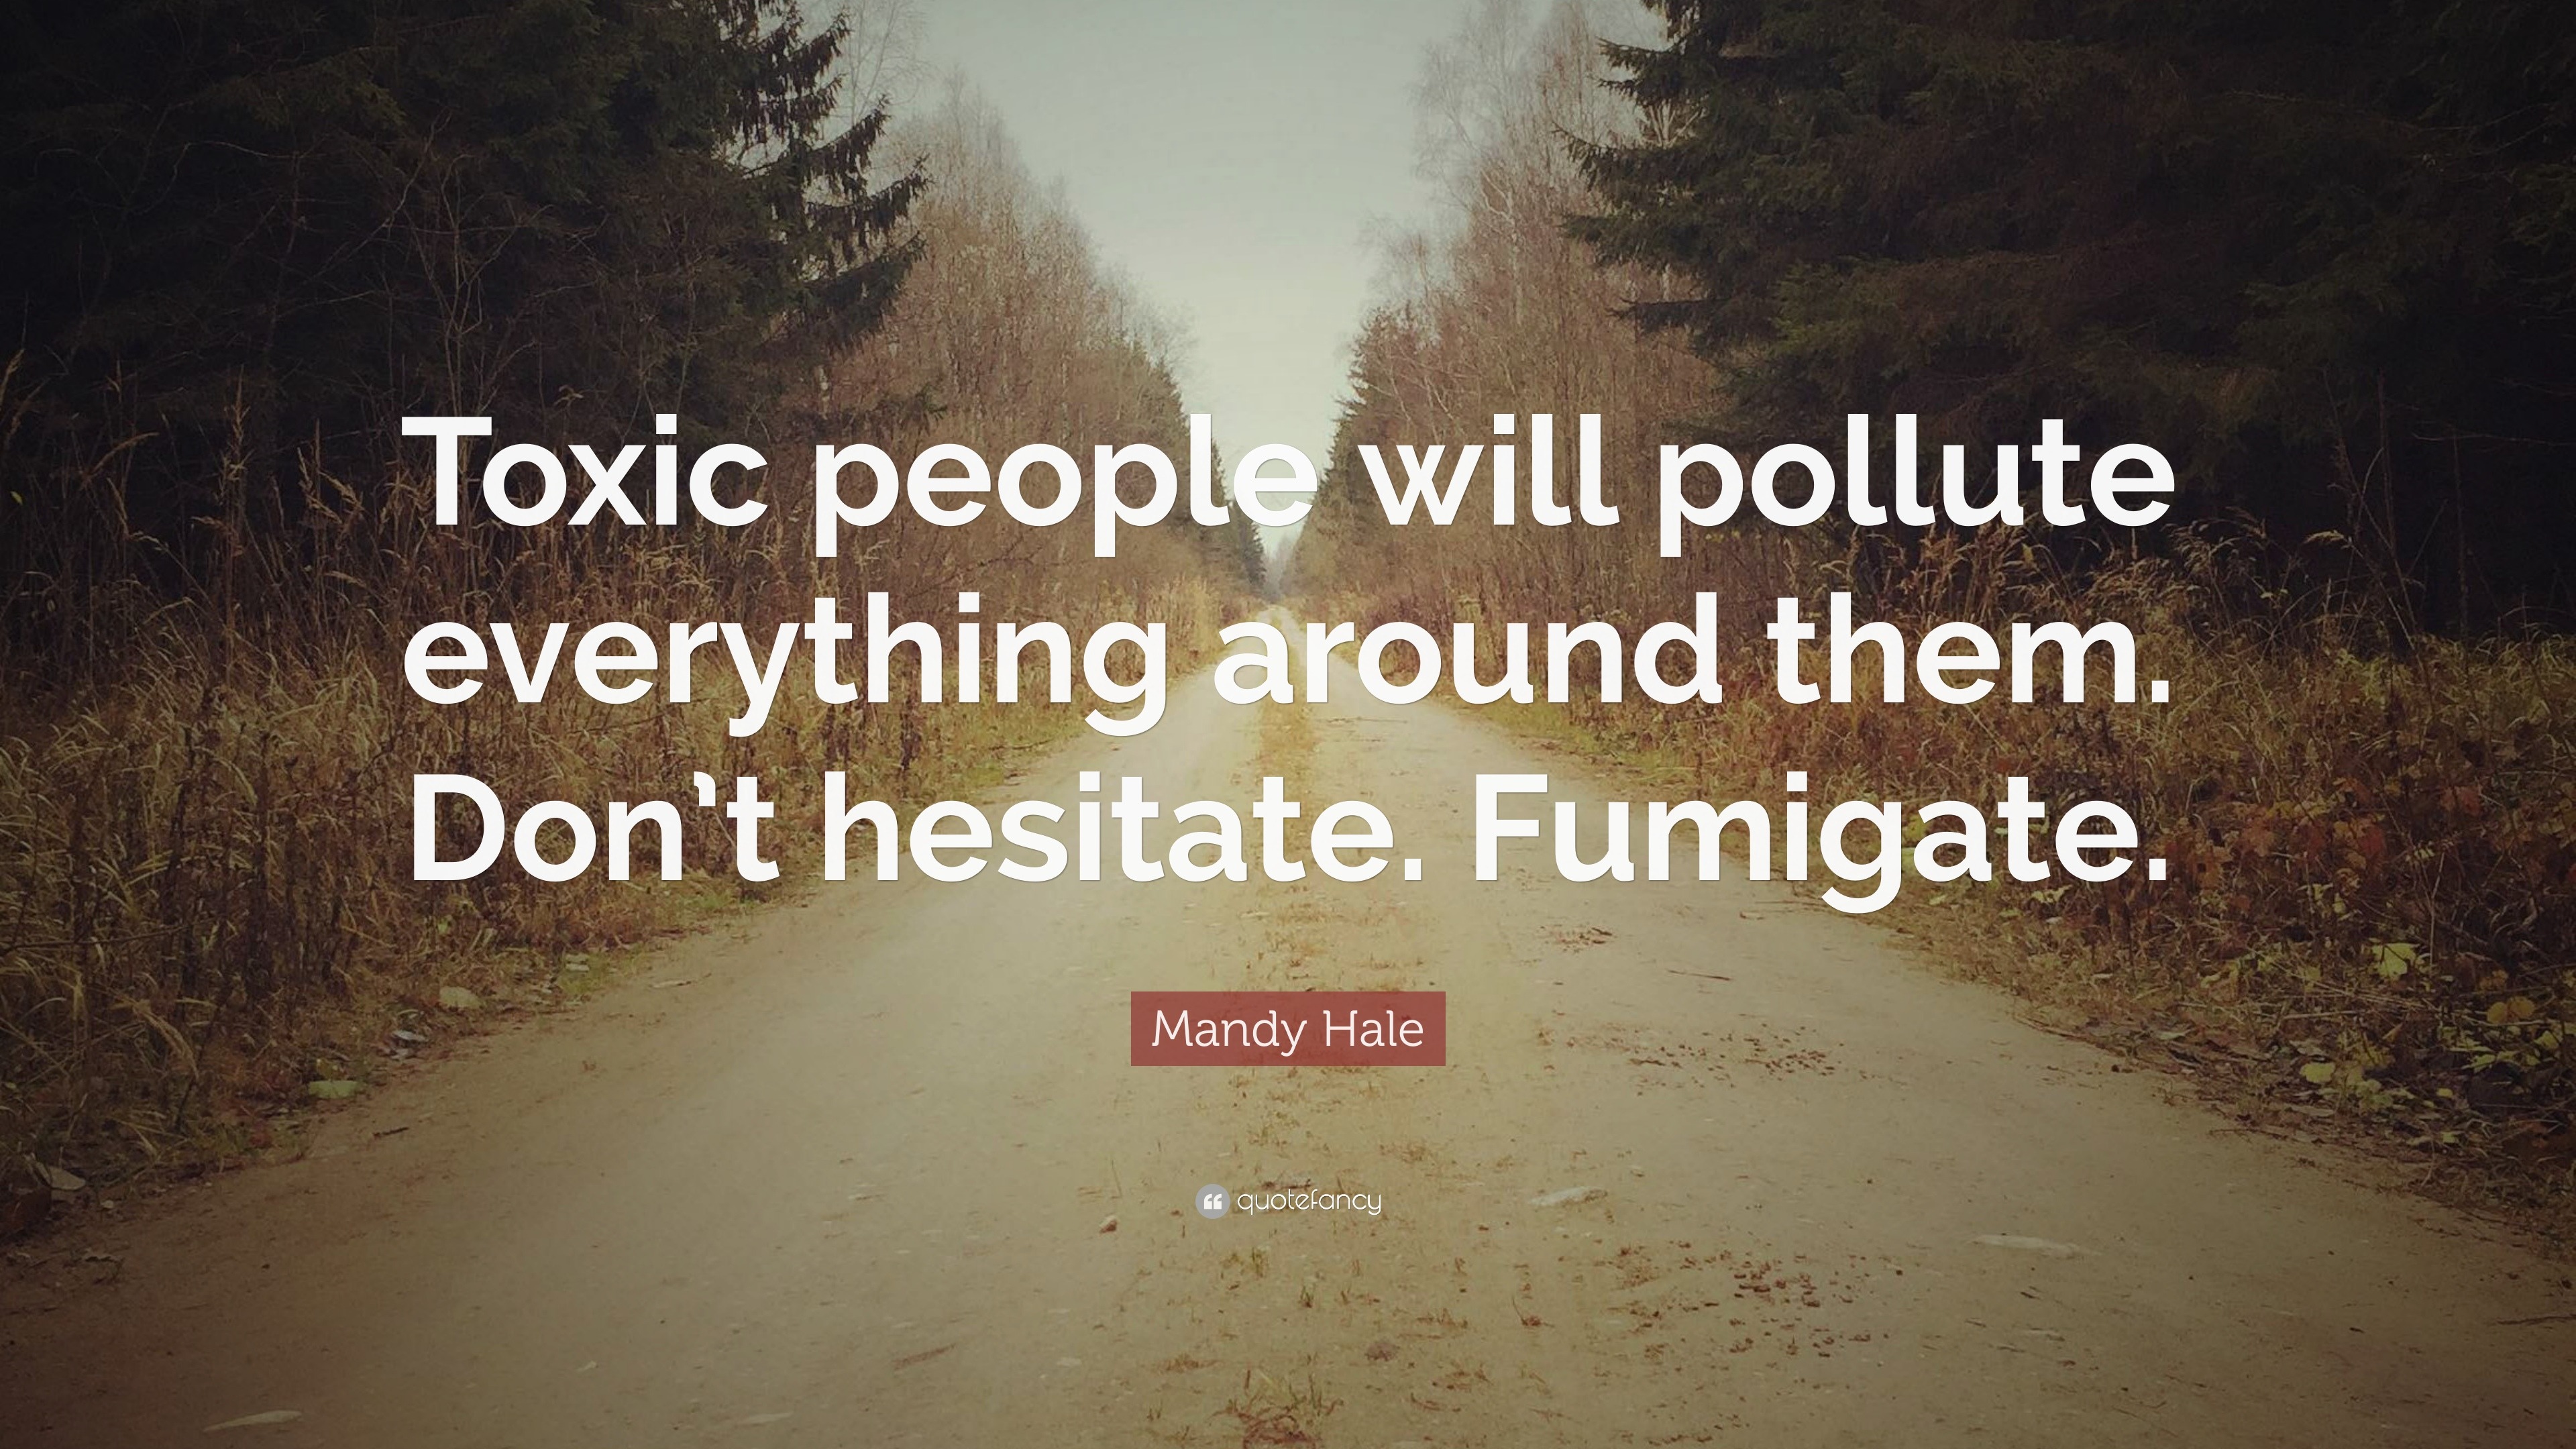 Mandy Hale Quote: “Toxic people will pollute everything around them